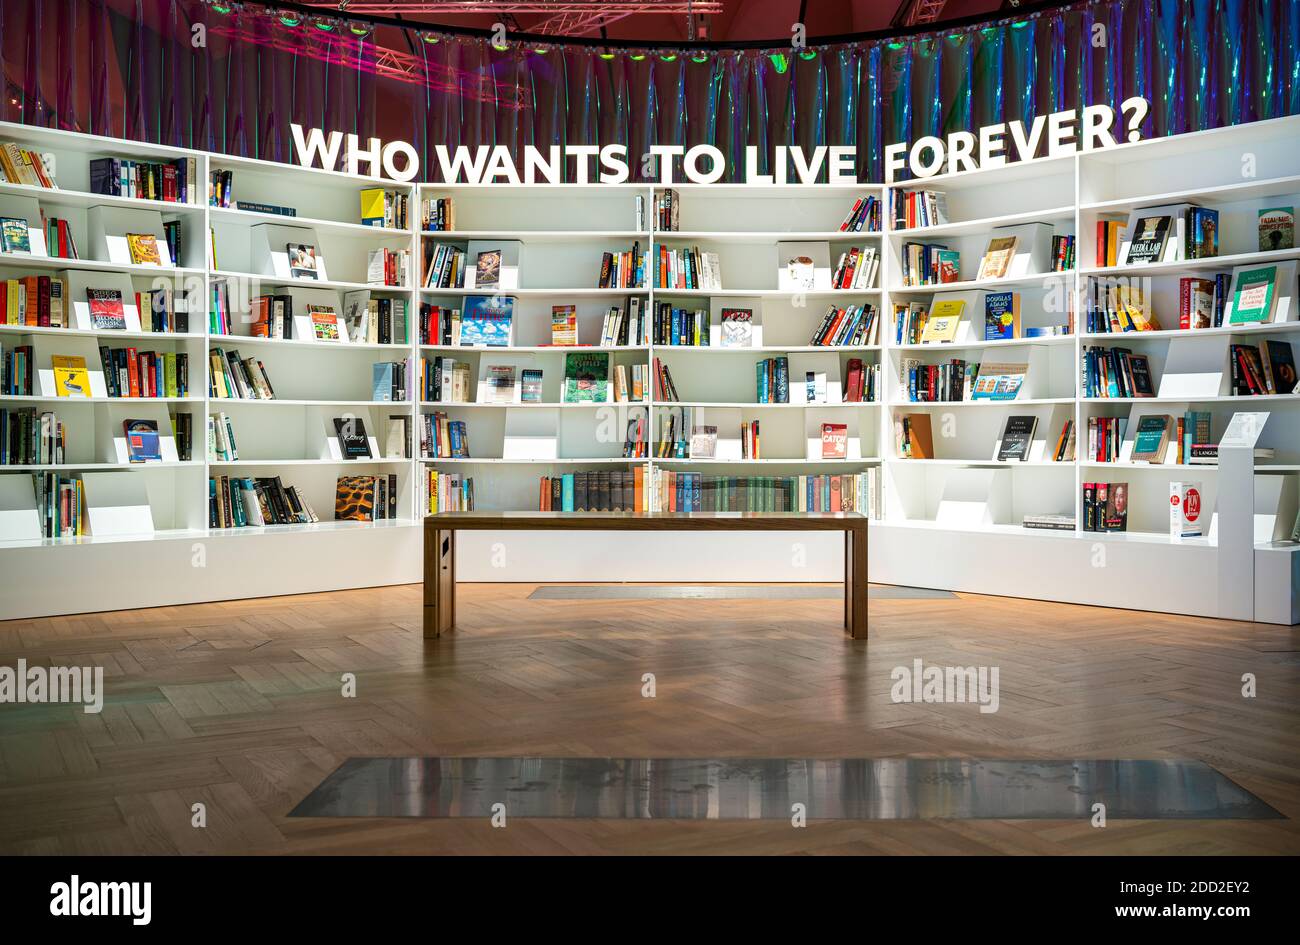 Who wants to live forever? A Library to Rebuild Civilization. The Future Starts Here show at the Victoria and Albert Museum in London Stock Photo